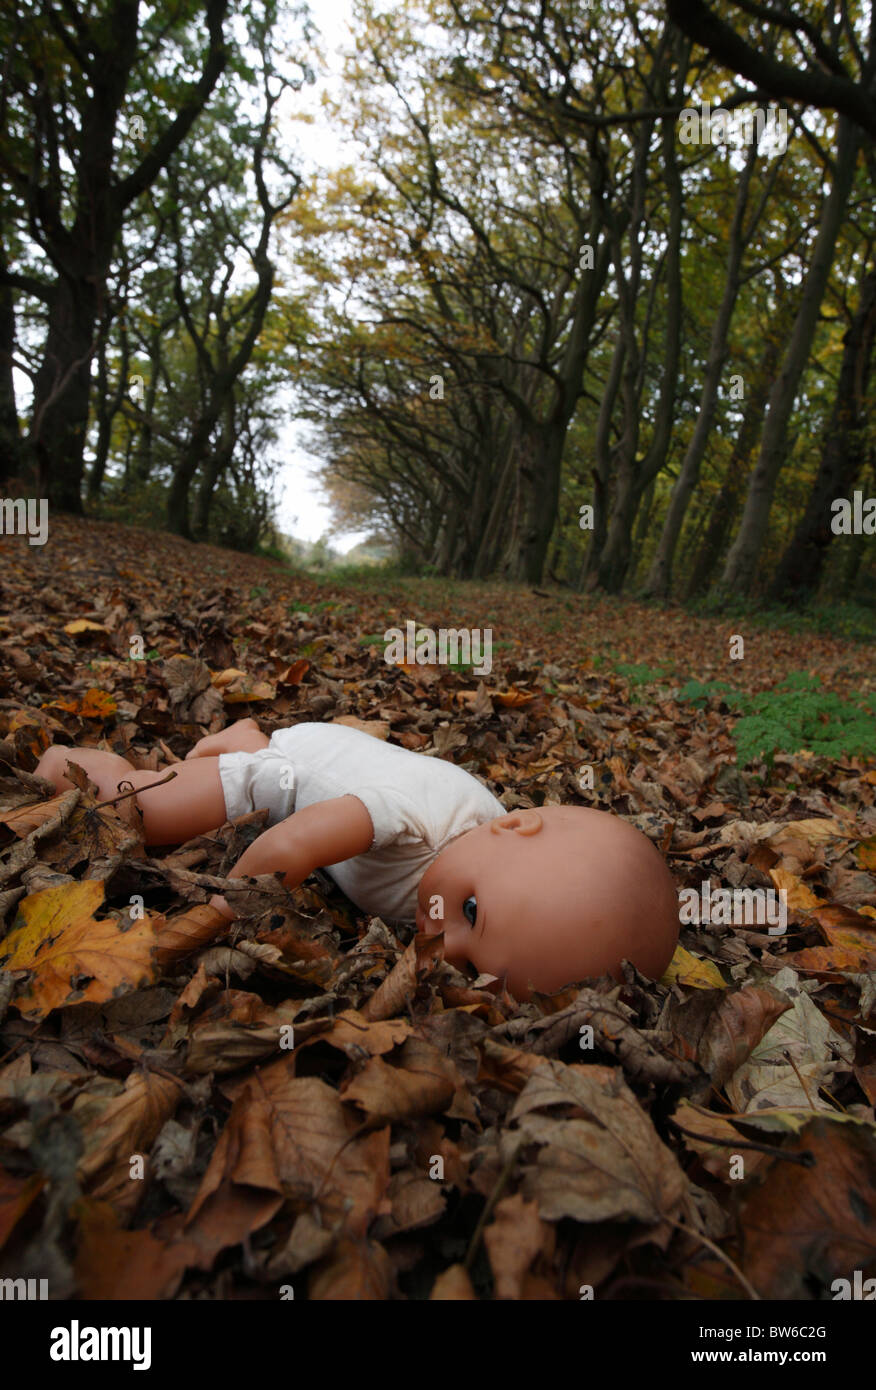 A childs doll face down on fallen leaves in the woods. Stock Photo